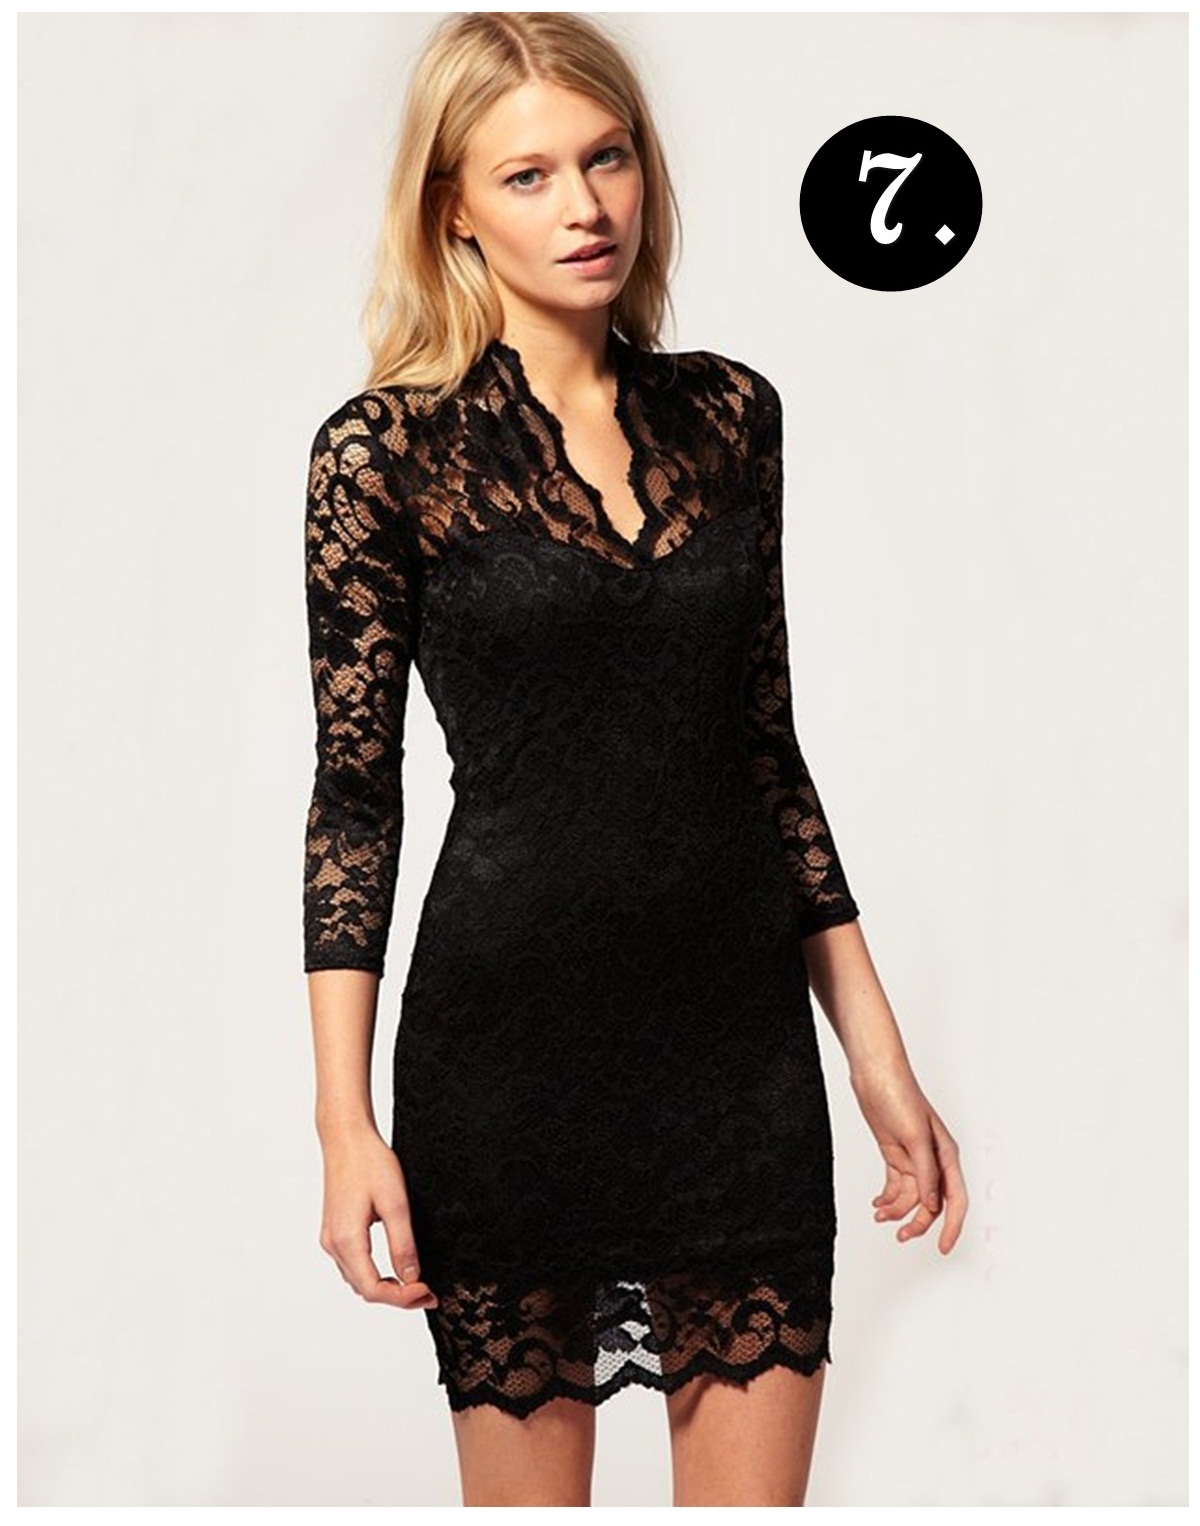 ASOS lace dress with scallop neck